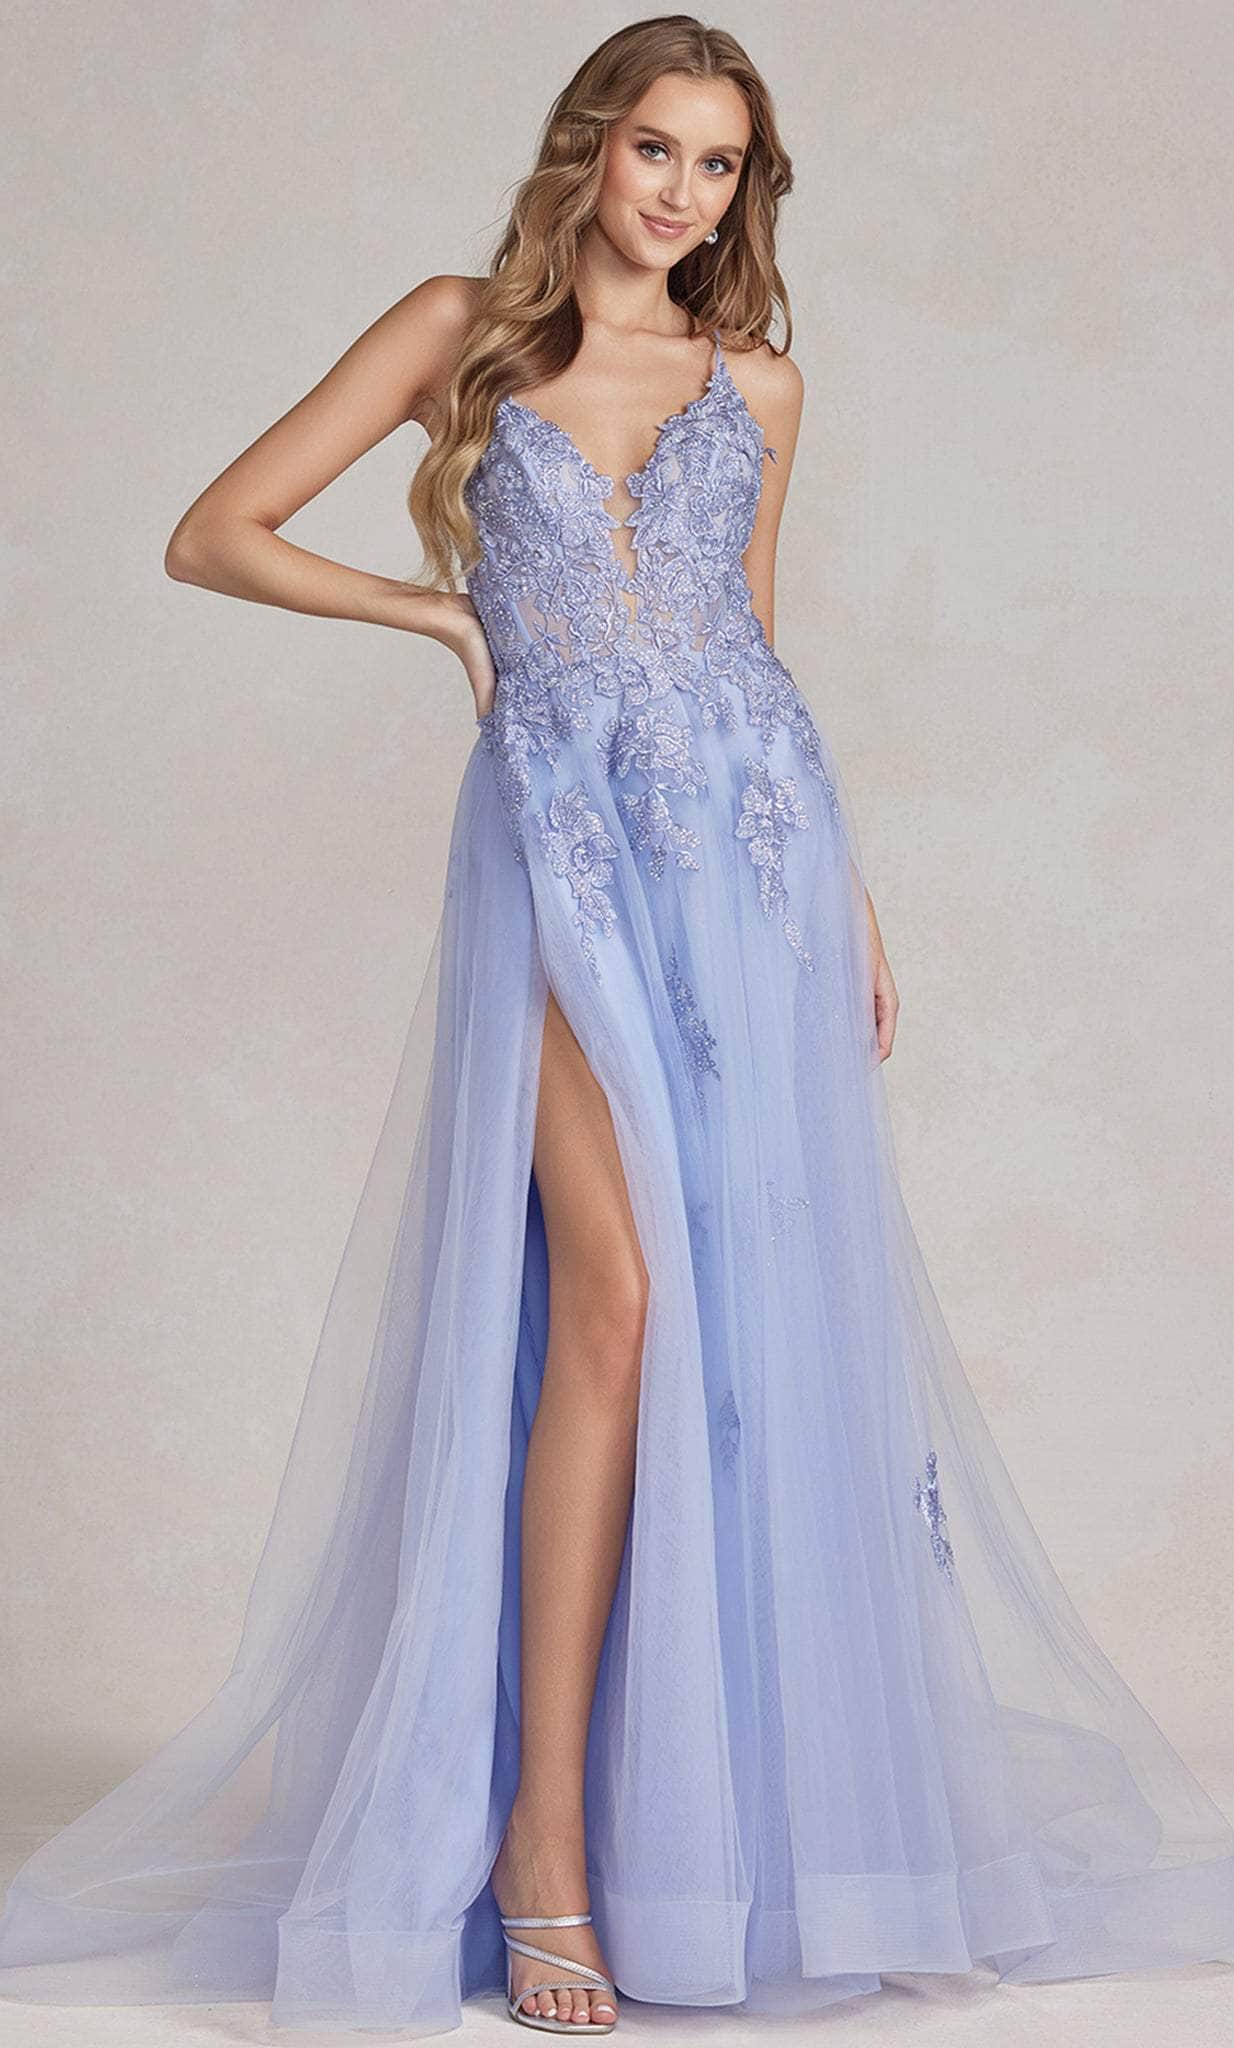 Nox Anabel G1149 - Embroidered Plunging V-Neck Prom Gown Prom Dresses 00 / Periwinkle